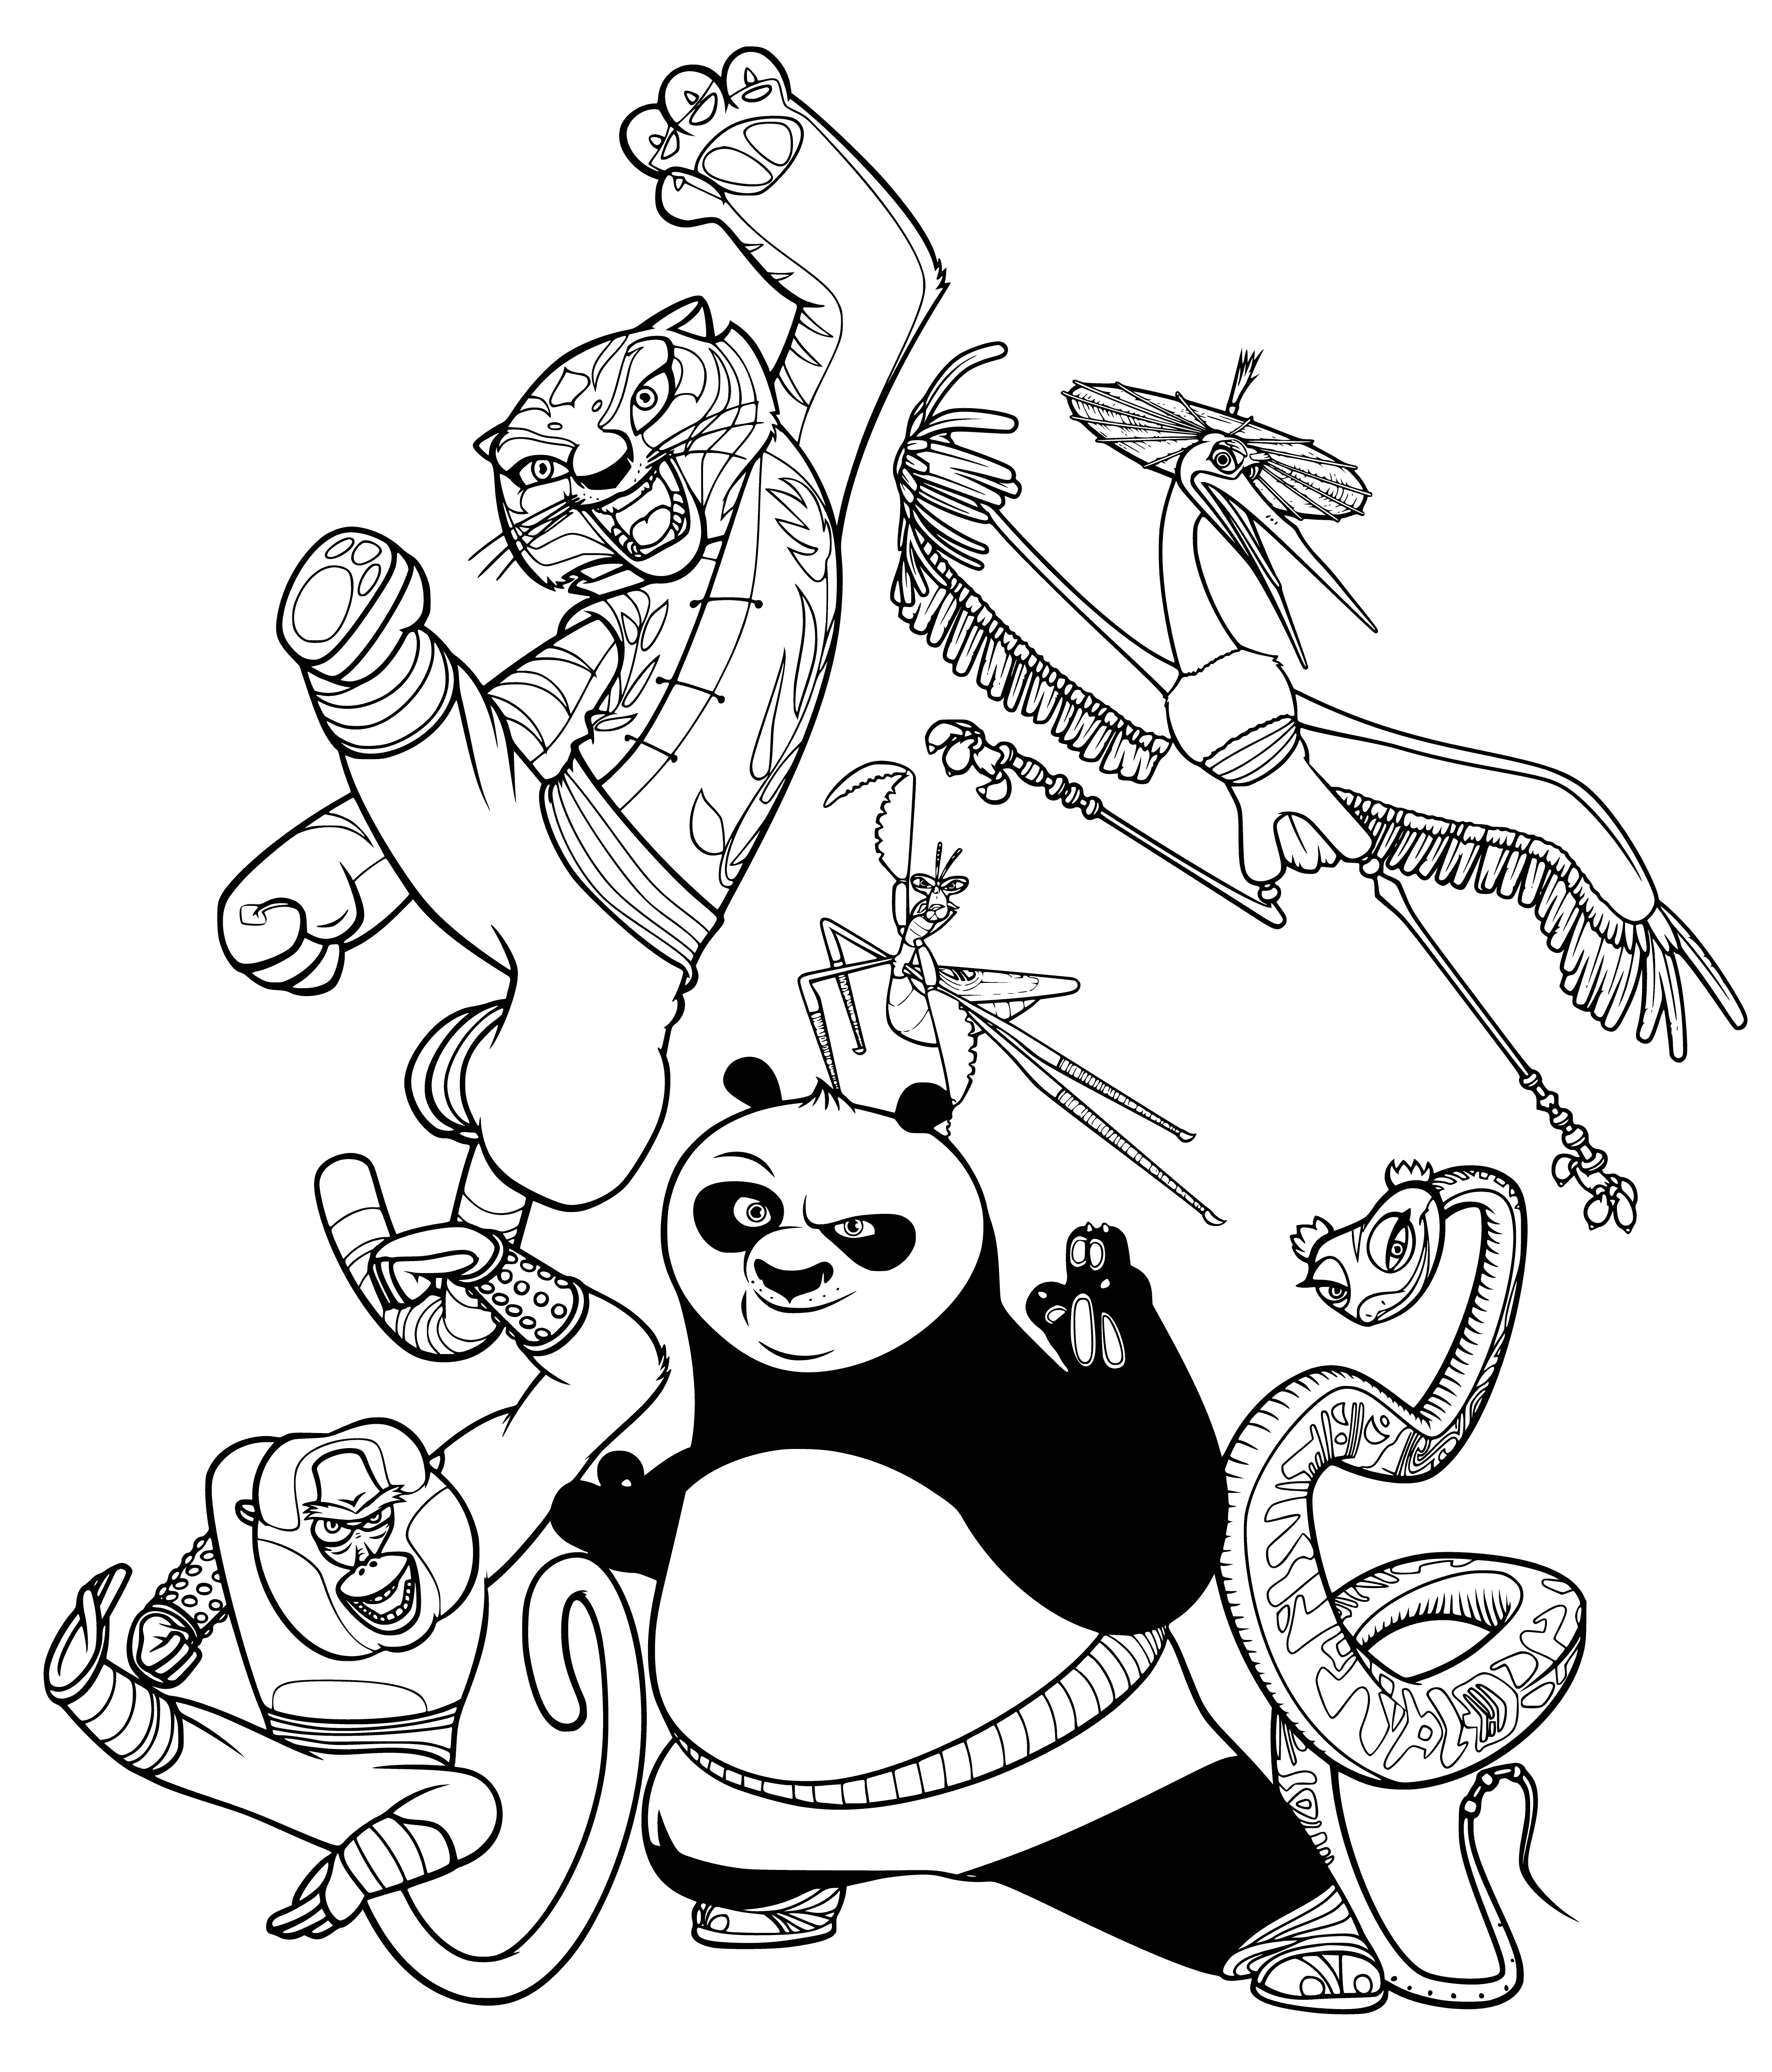 coloring page: Po & Five are posing with fists up, determined looks on their faces. #KungFuPanda